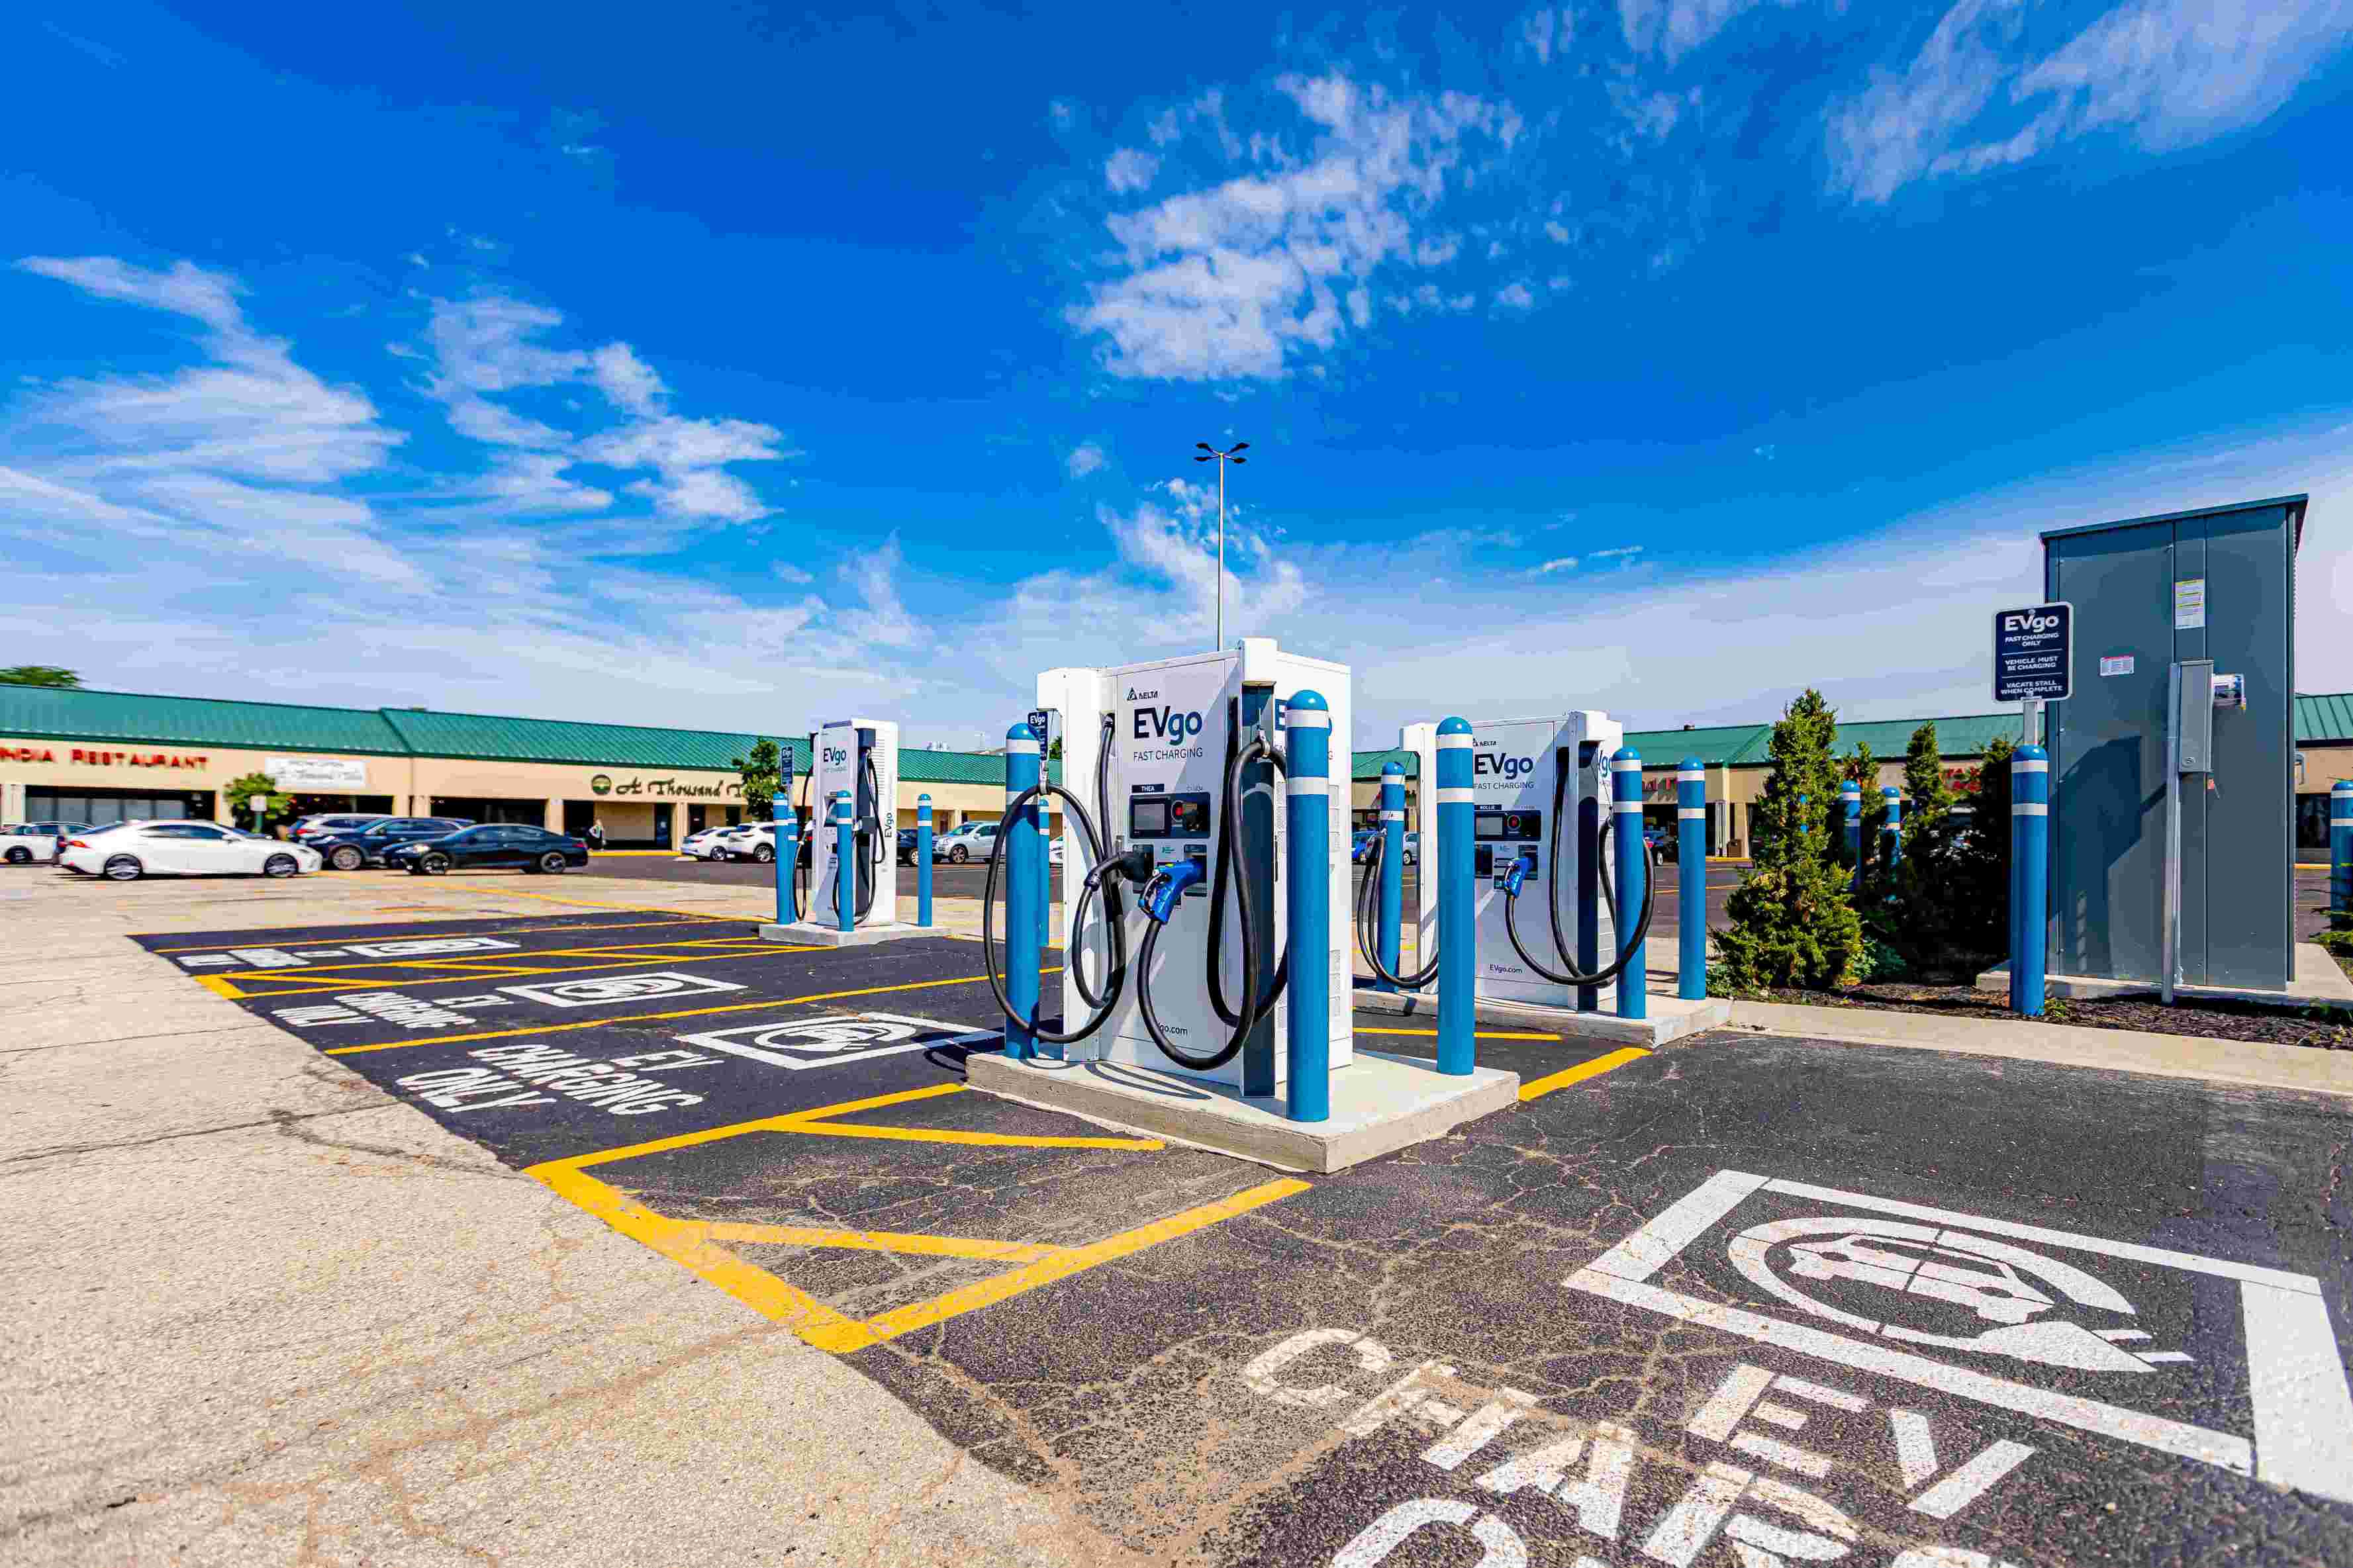 An EVgo fast charging station. Photo: Business Wire